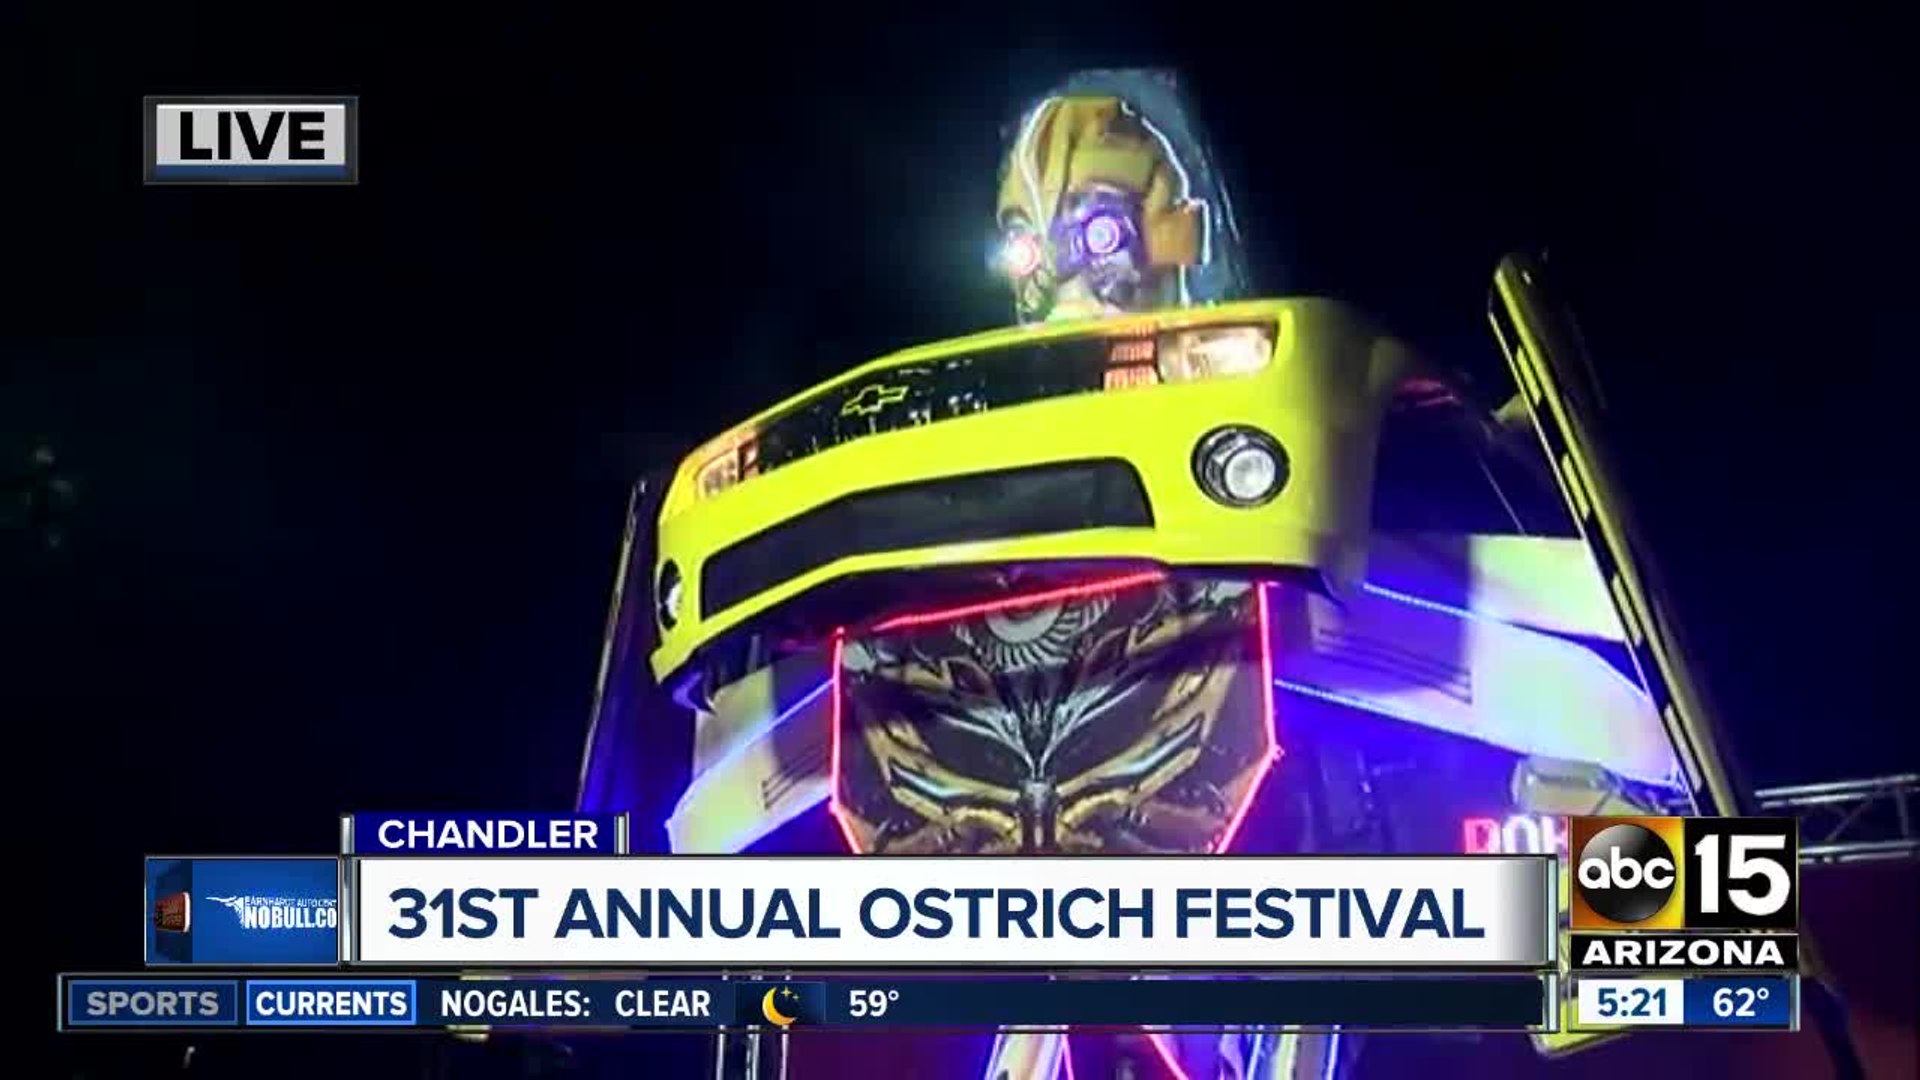 Bumblebee is at 31st Annual Ostrich Festival